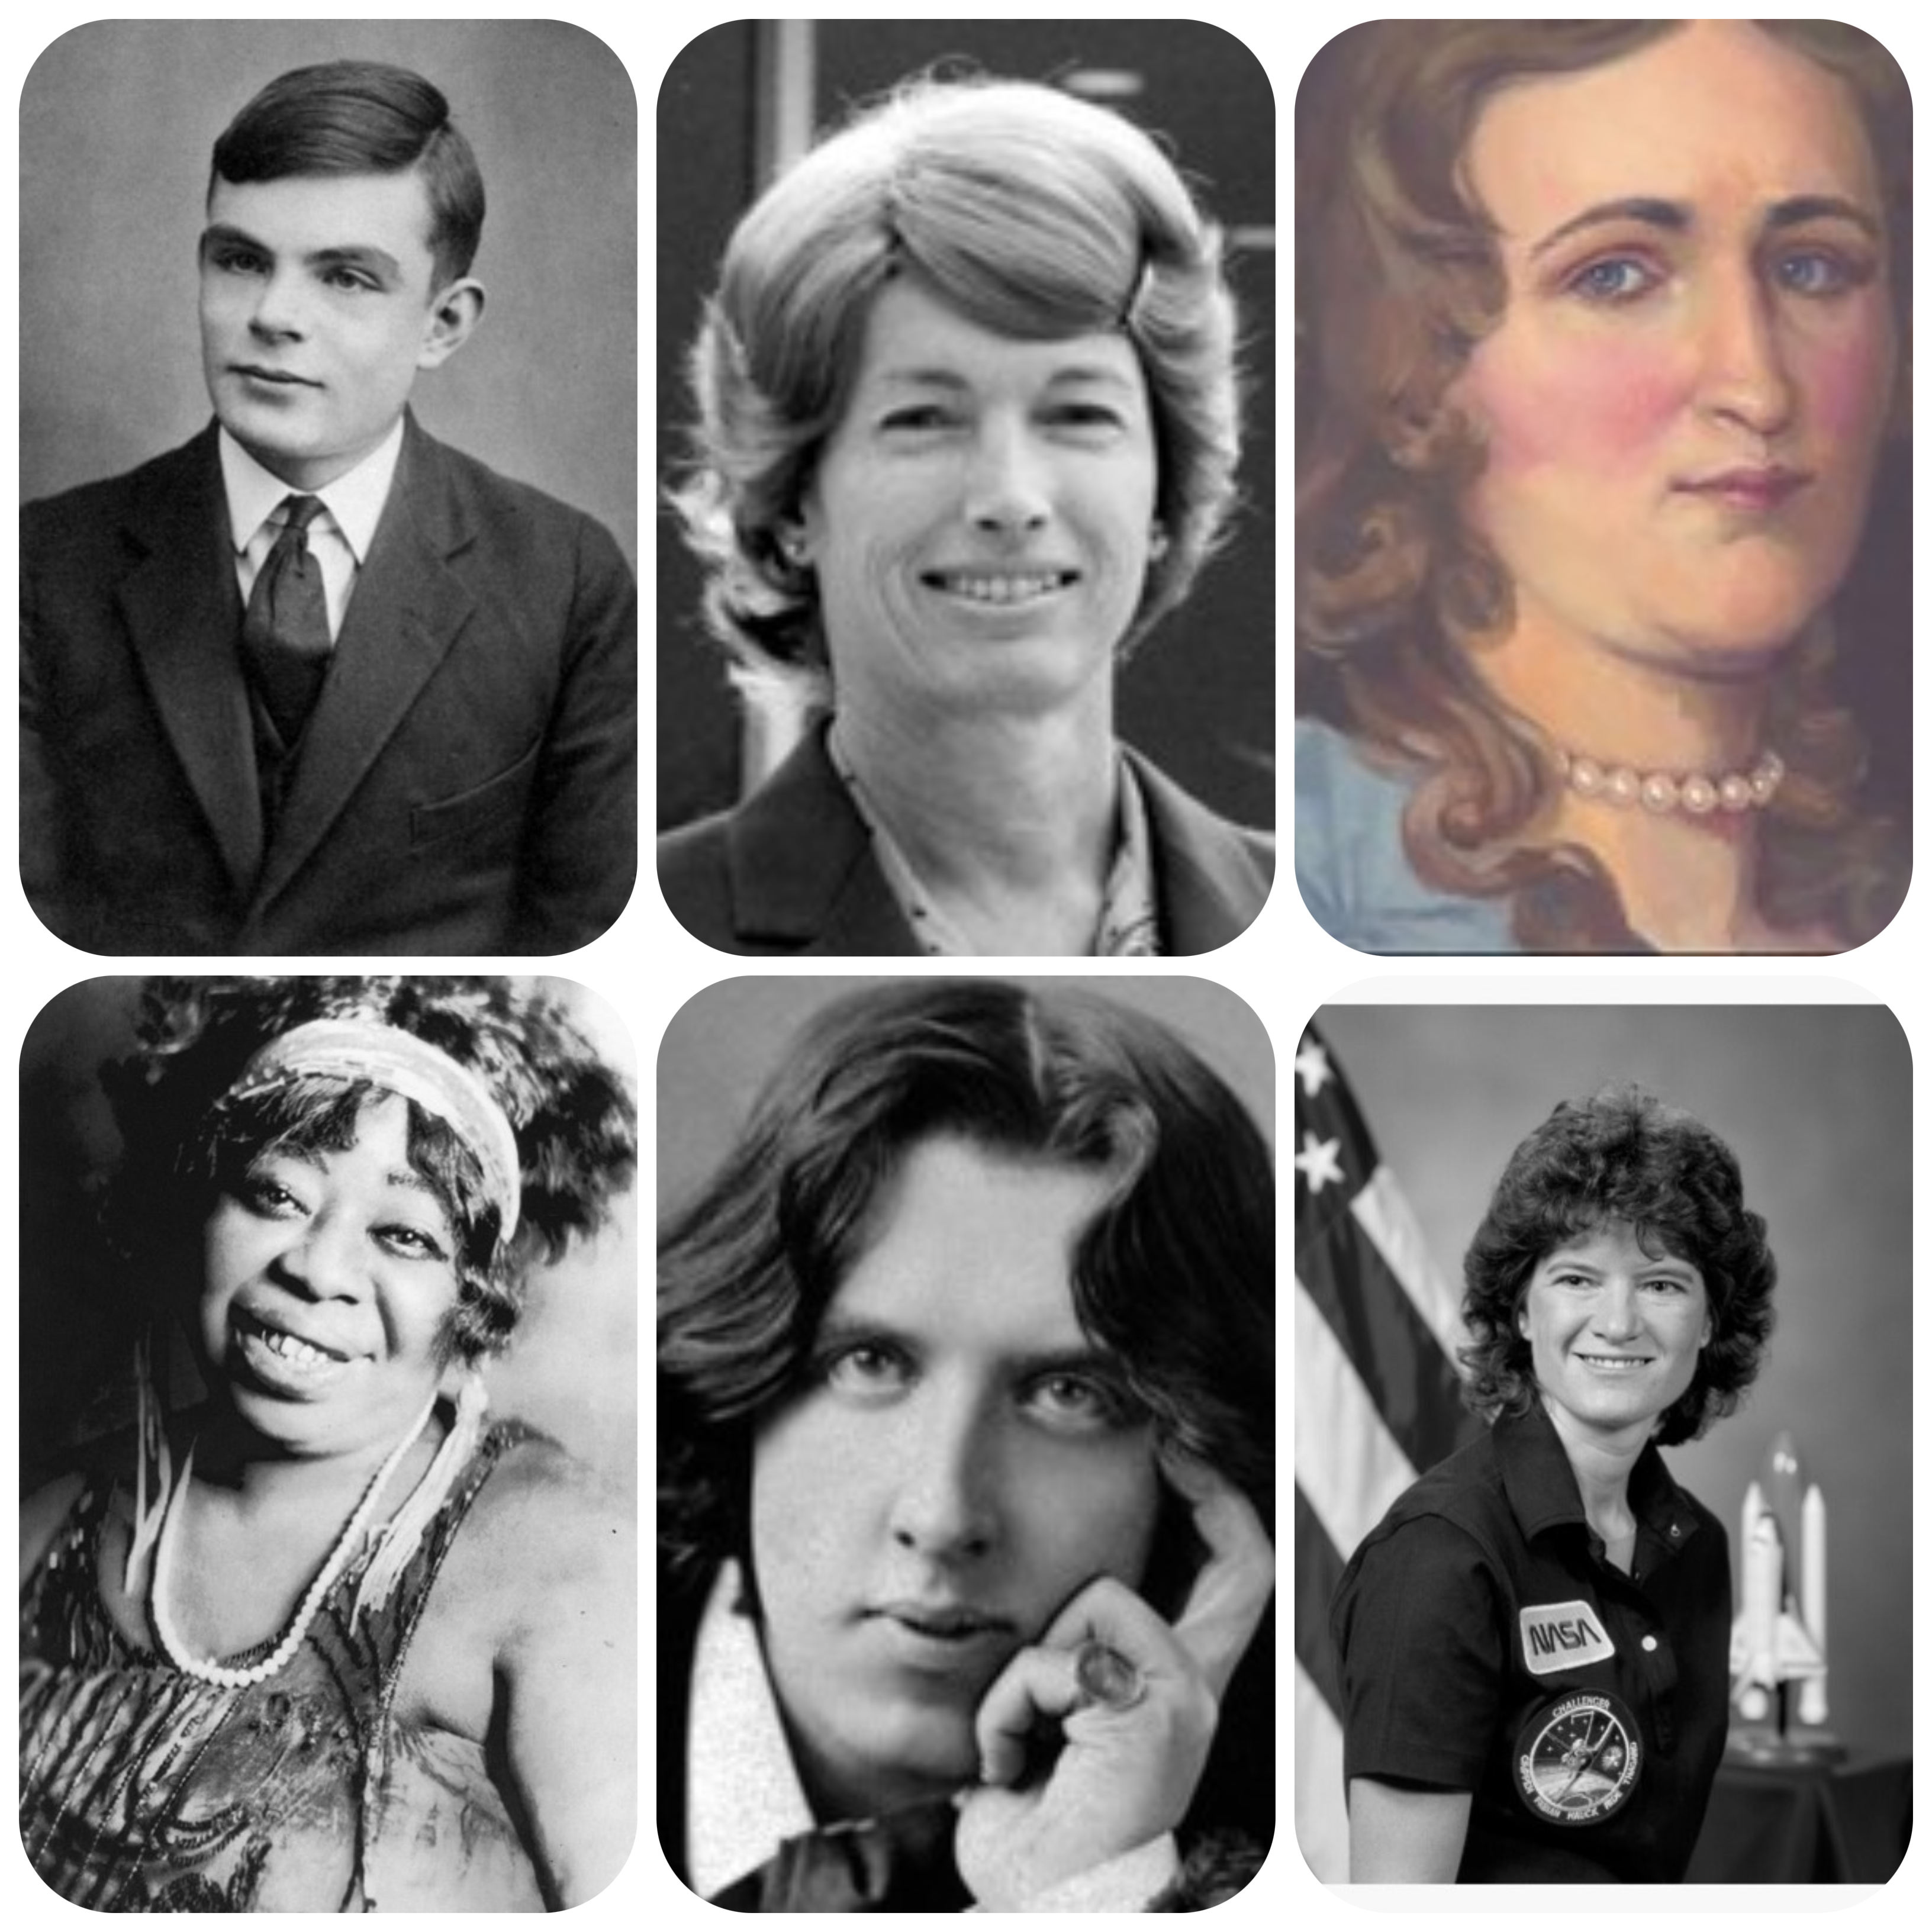 Montreal Careers | Queer History Month - 6 portraits of renowned LGBTQ+ faces